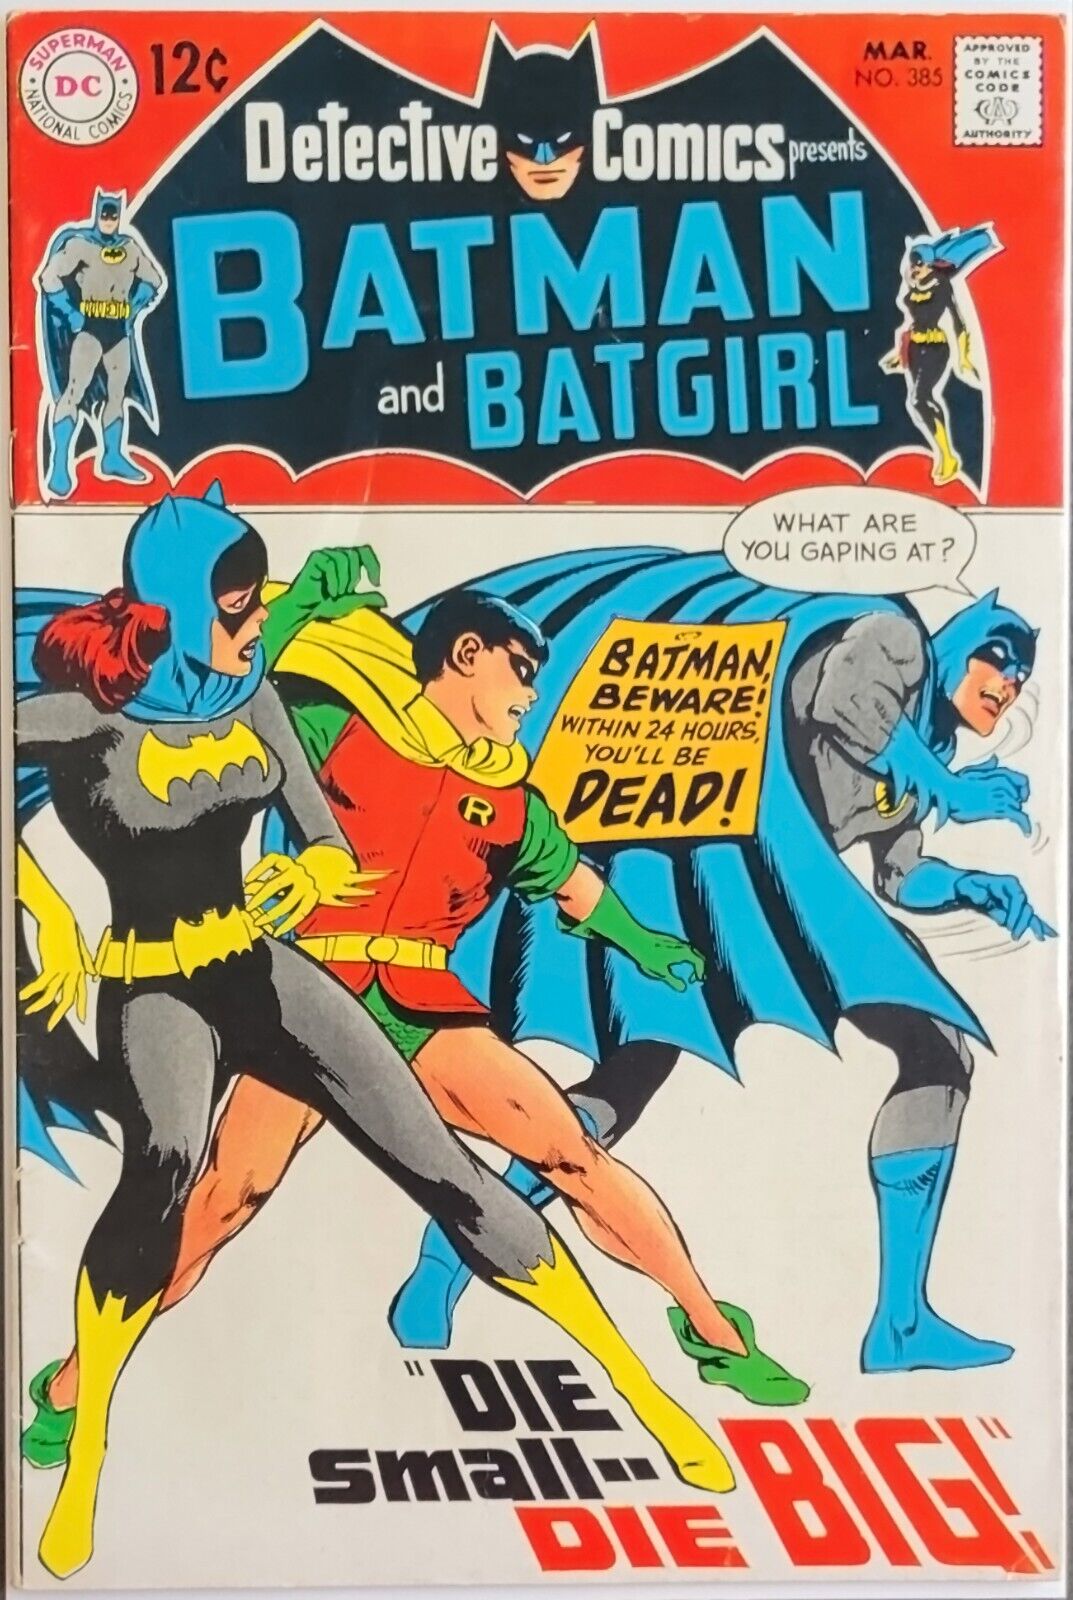 Detective Comics #385 (1969) Vintage Silver Age Neal Adams Cover, Batgirl Story